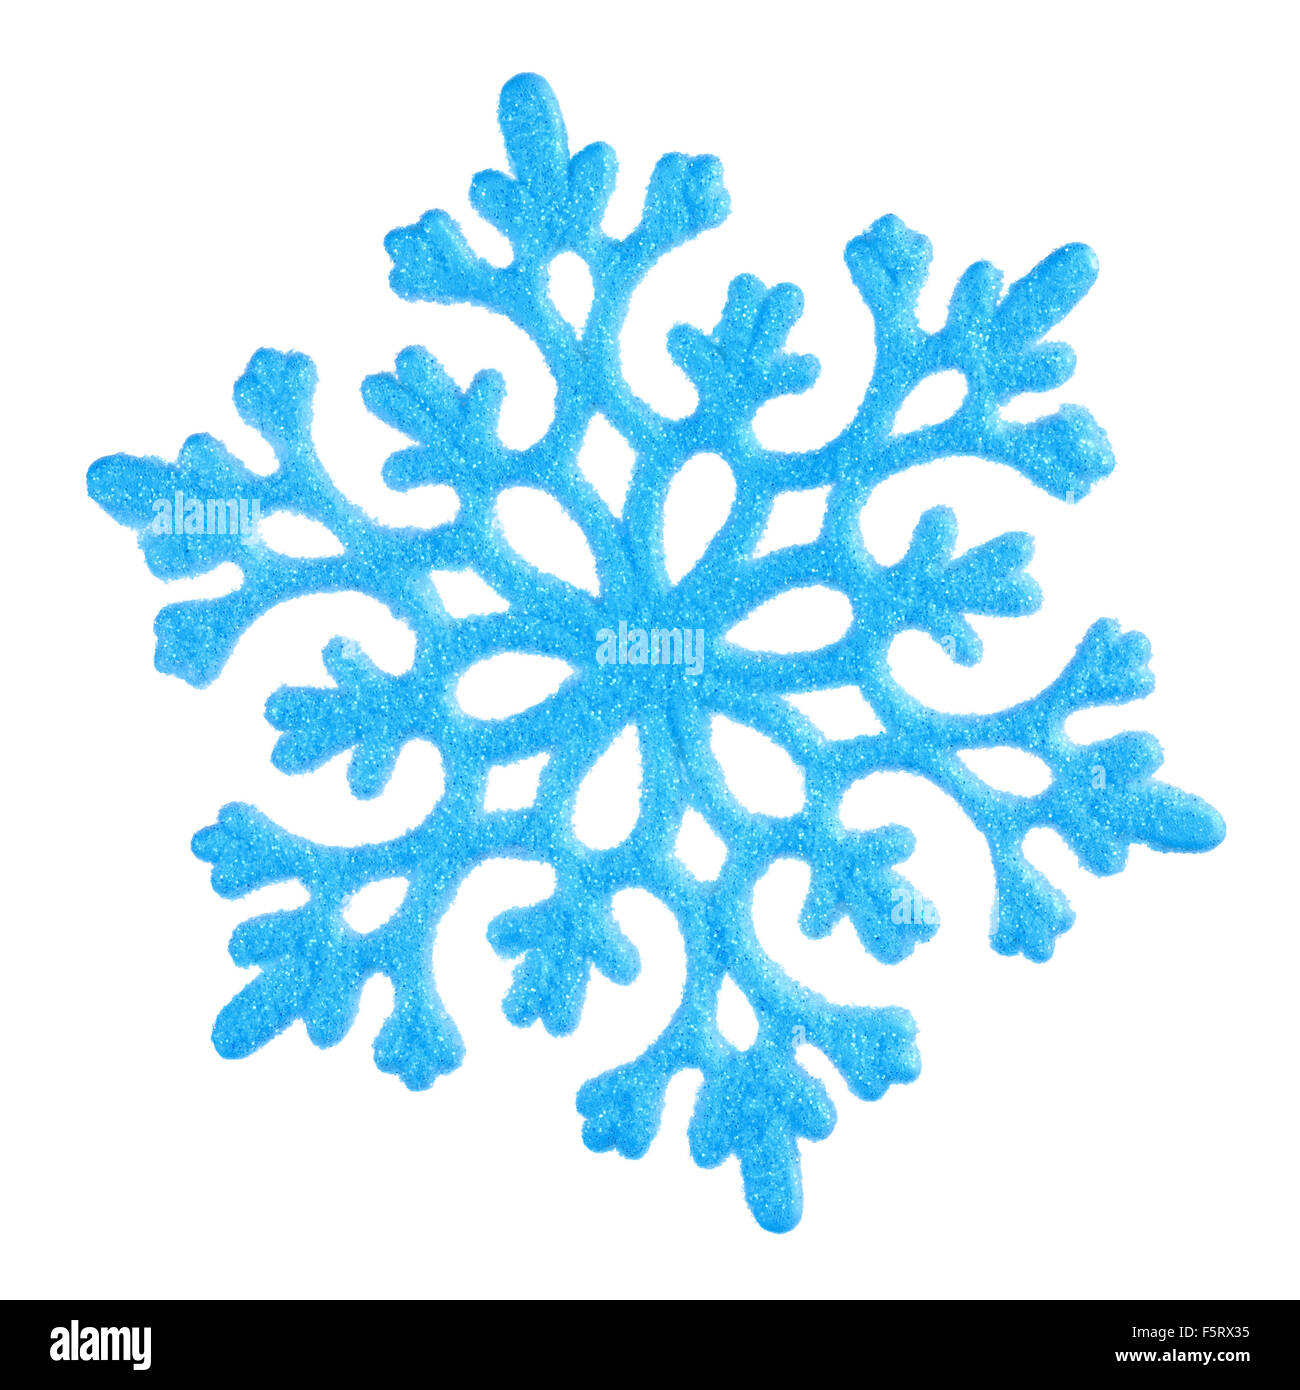 Studio close-up of a bright blue snowflake ornament on white background Banque D'Images